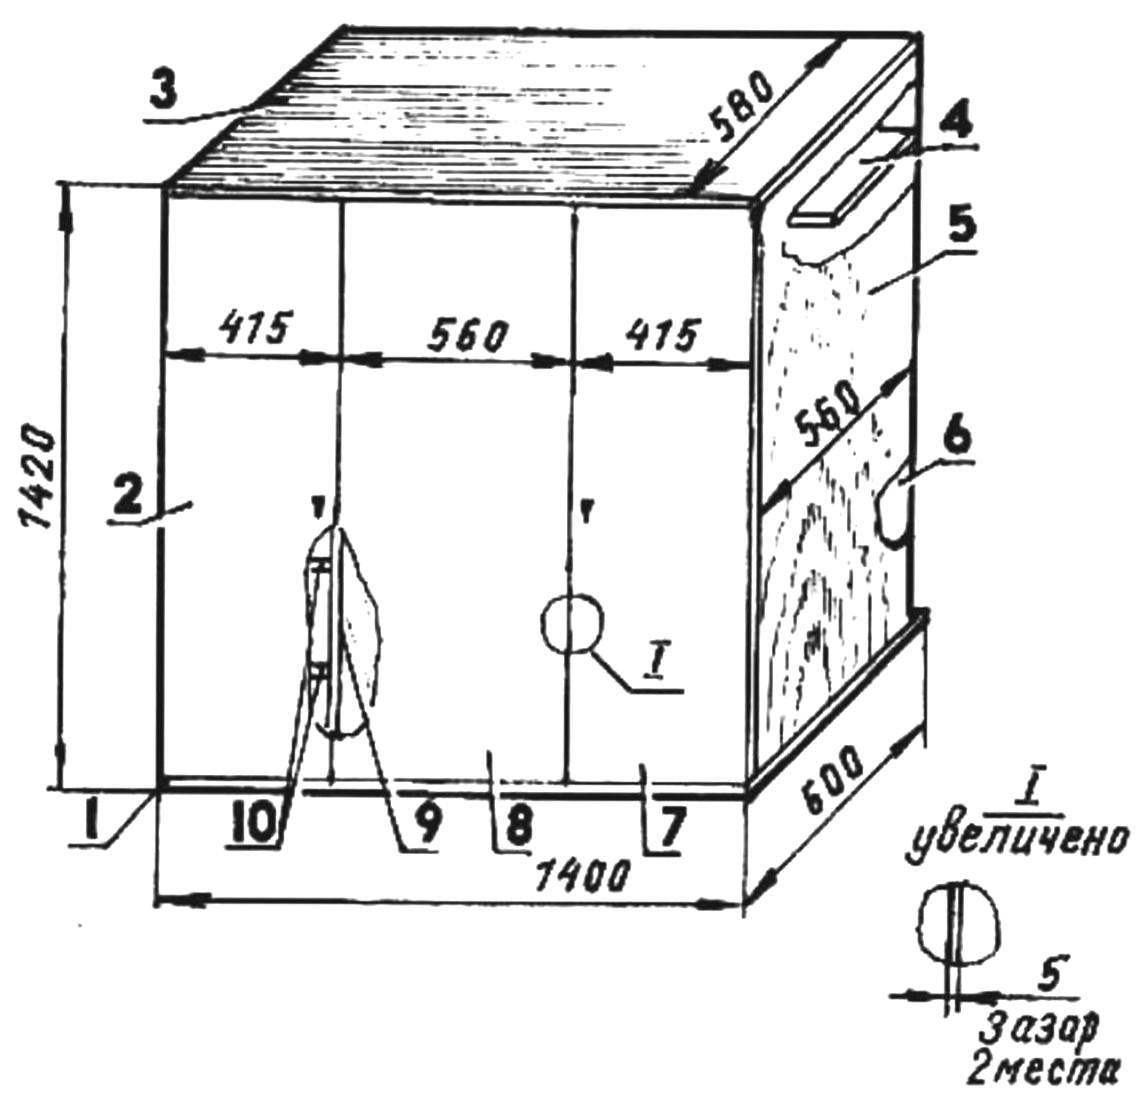 Fig. 1. Closet, from which will be made for the hall closet